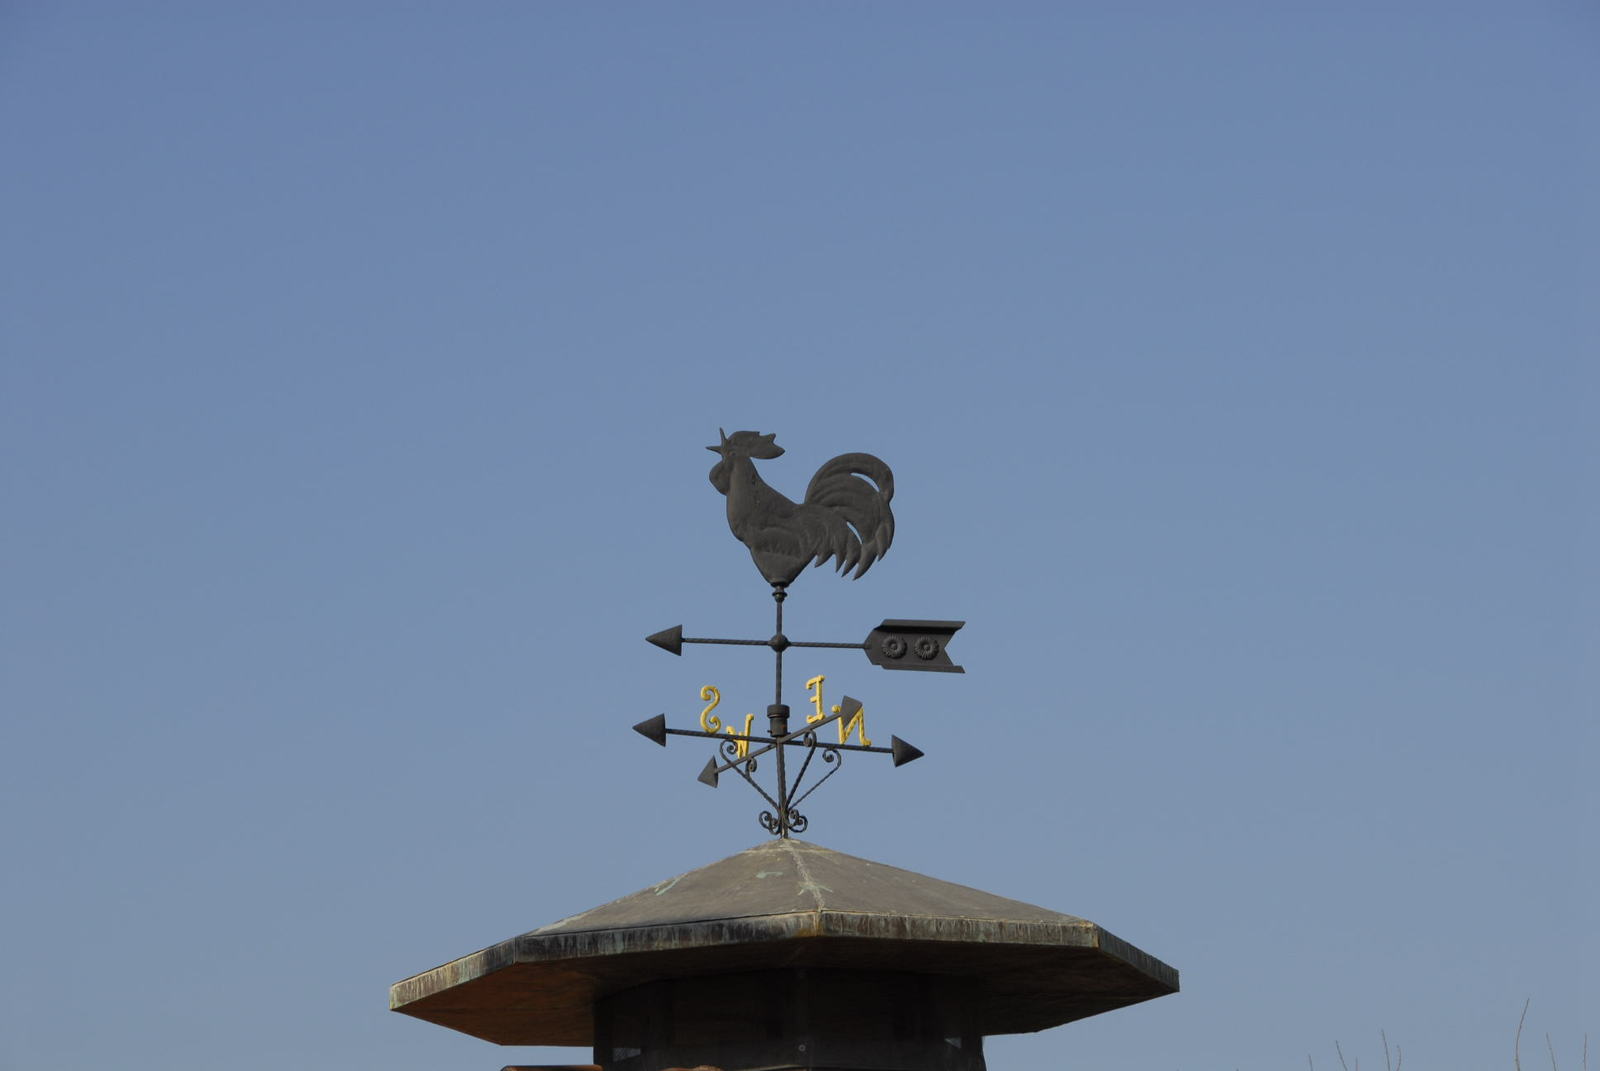 the weather vane with rooster and weather vane is perched on top of a house